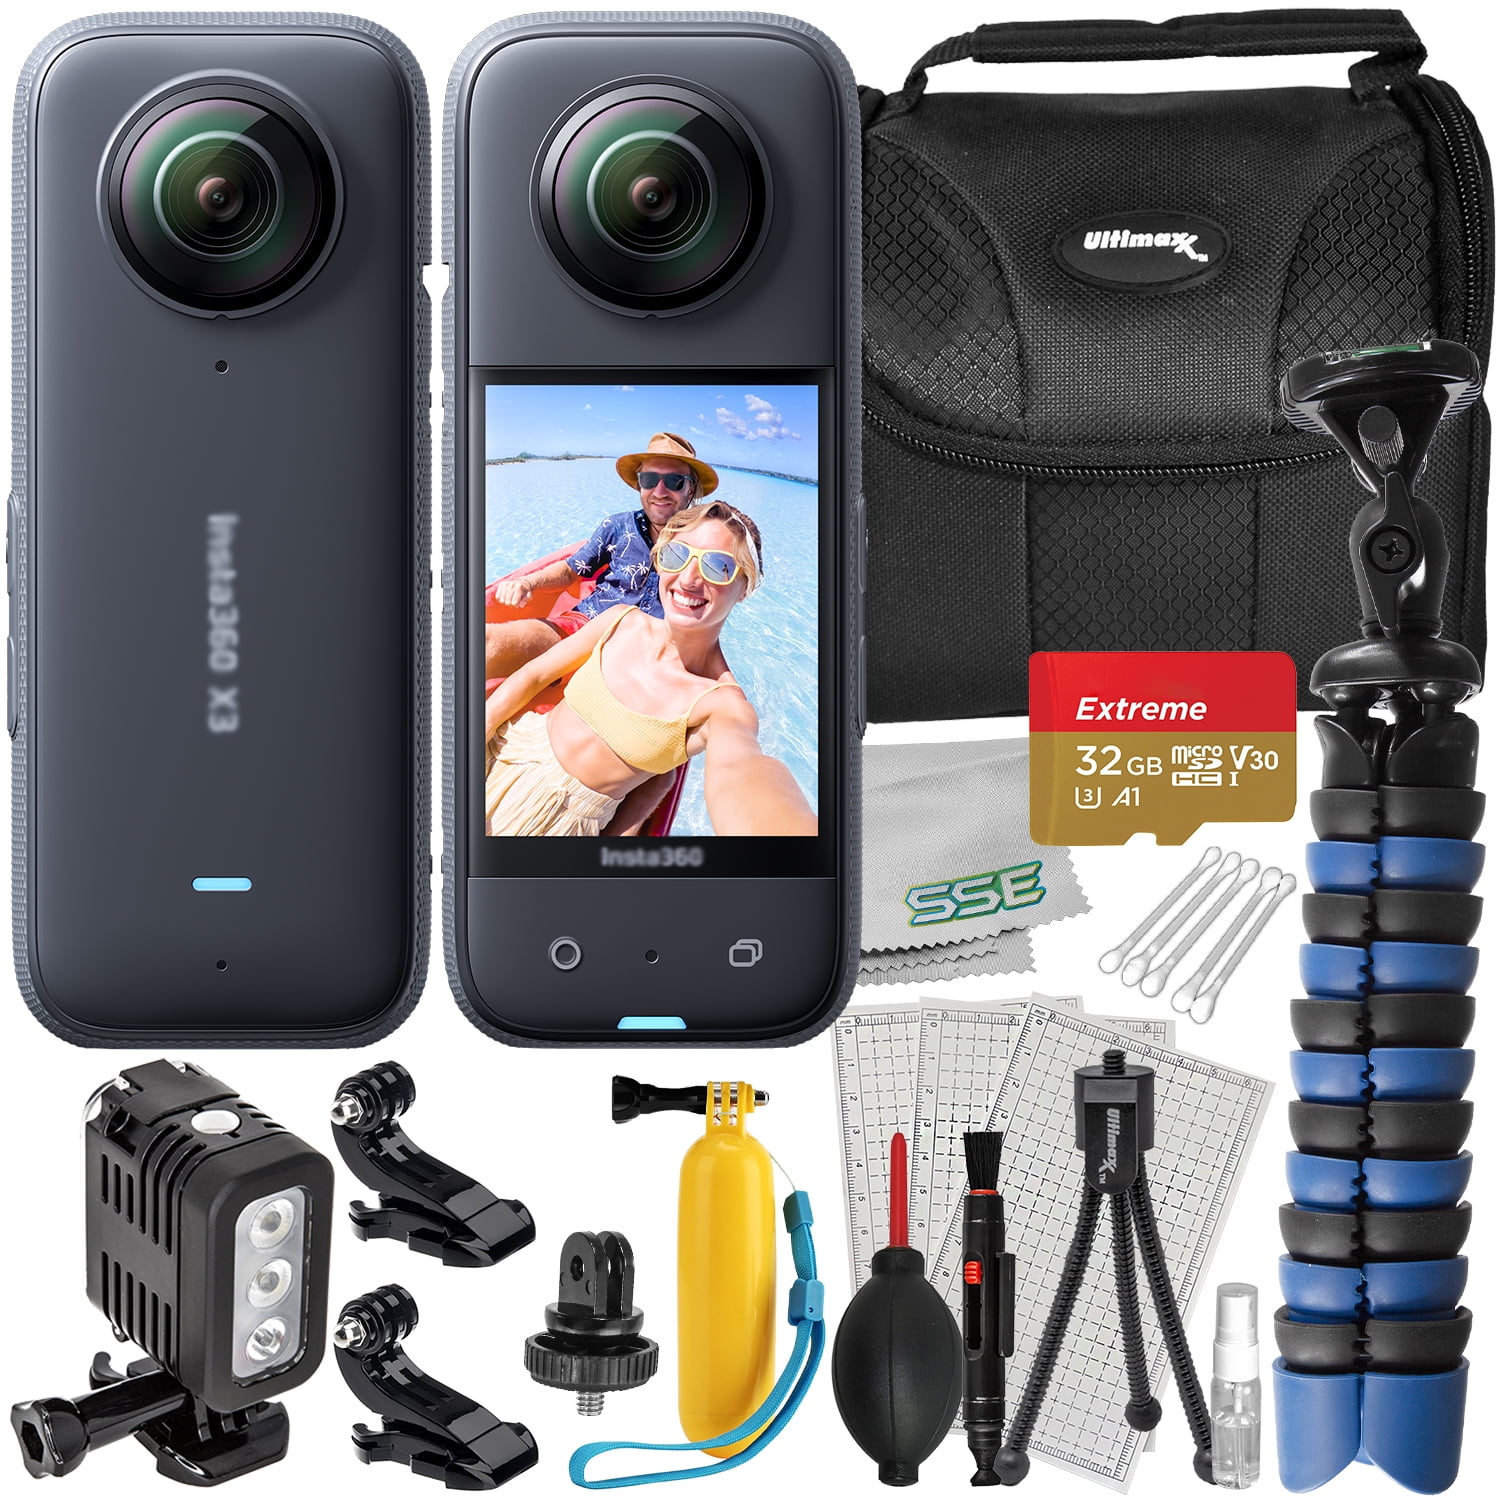 Ultimaxx Advanced Action Insta360 ONE X3 Bundle - Includes: 32GB Extreme  microSDHC, 40M Underwater LED Light & Much More (20pc Bundle)